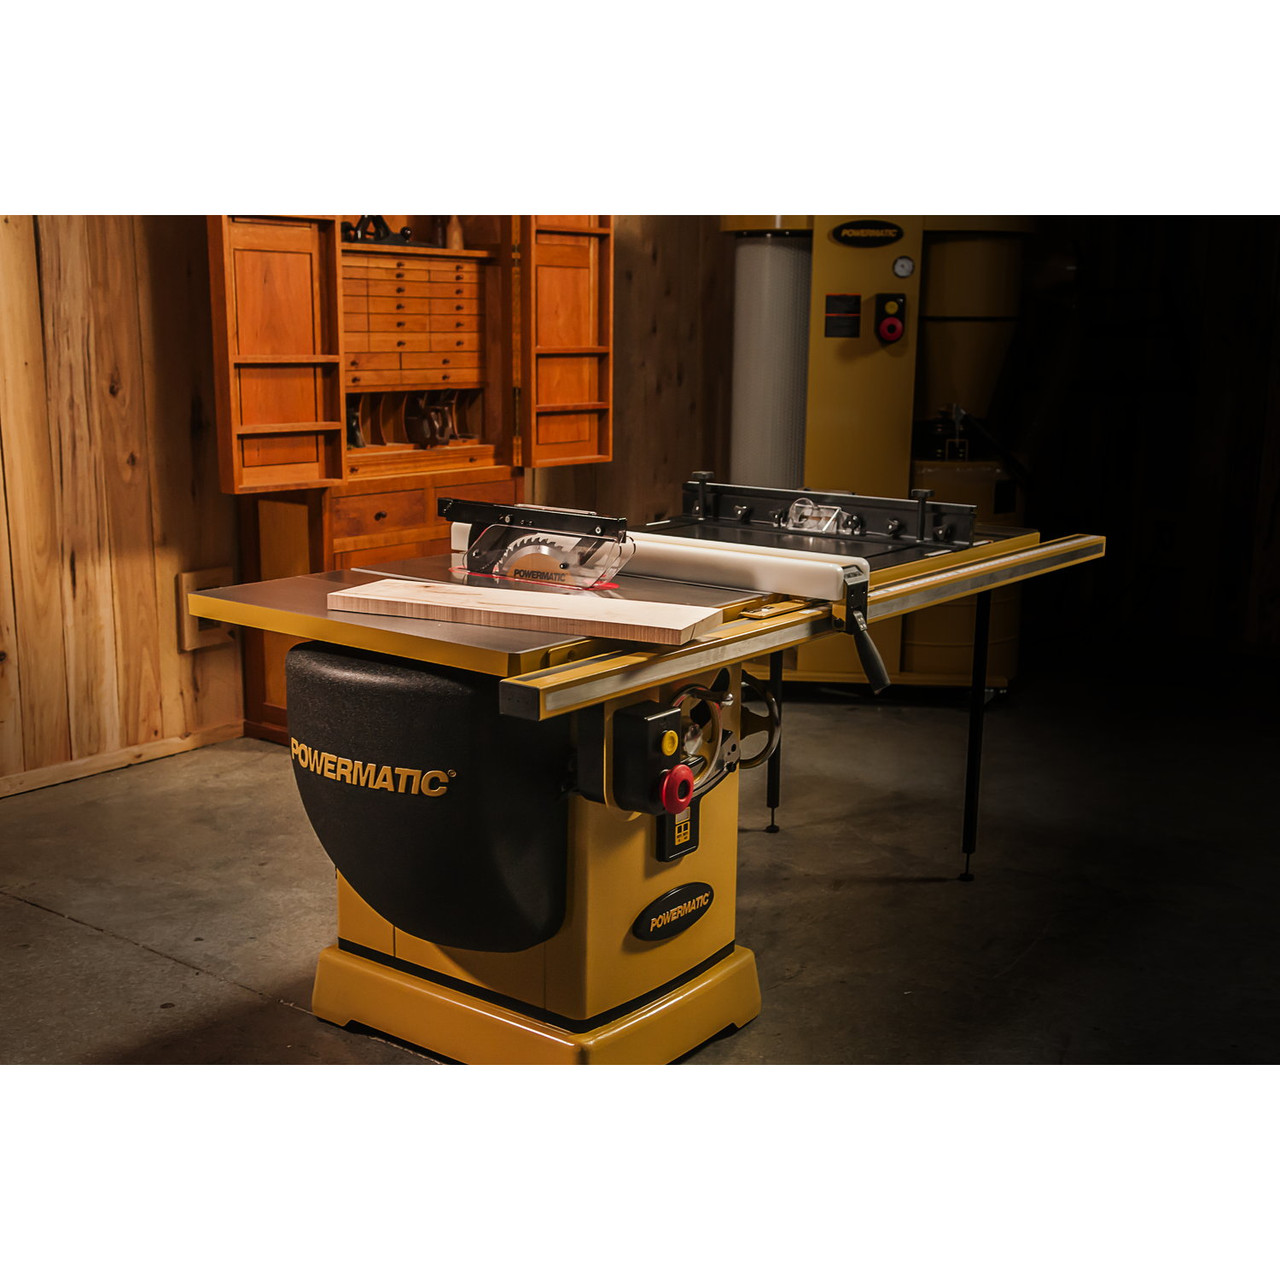 Powermatic, PM2000, 10" Tablesaw, 5HP, 3PH, 230/460V, 50" Accu-Fence System, Router Lift